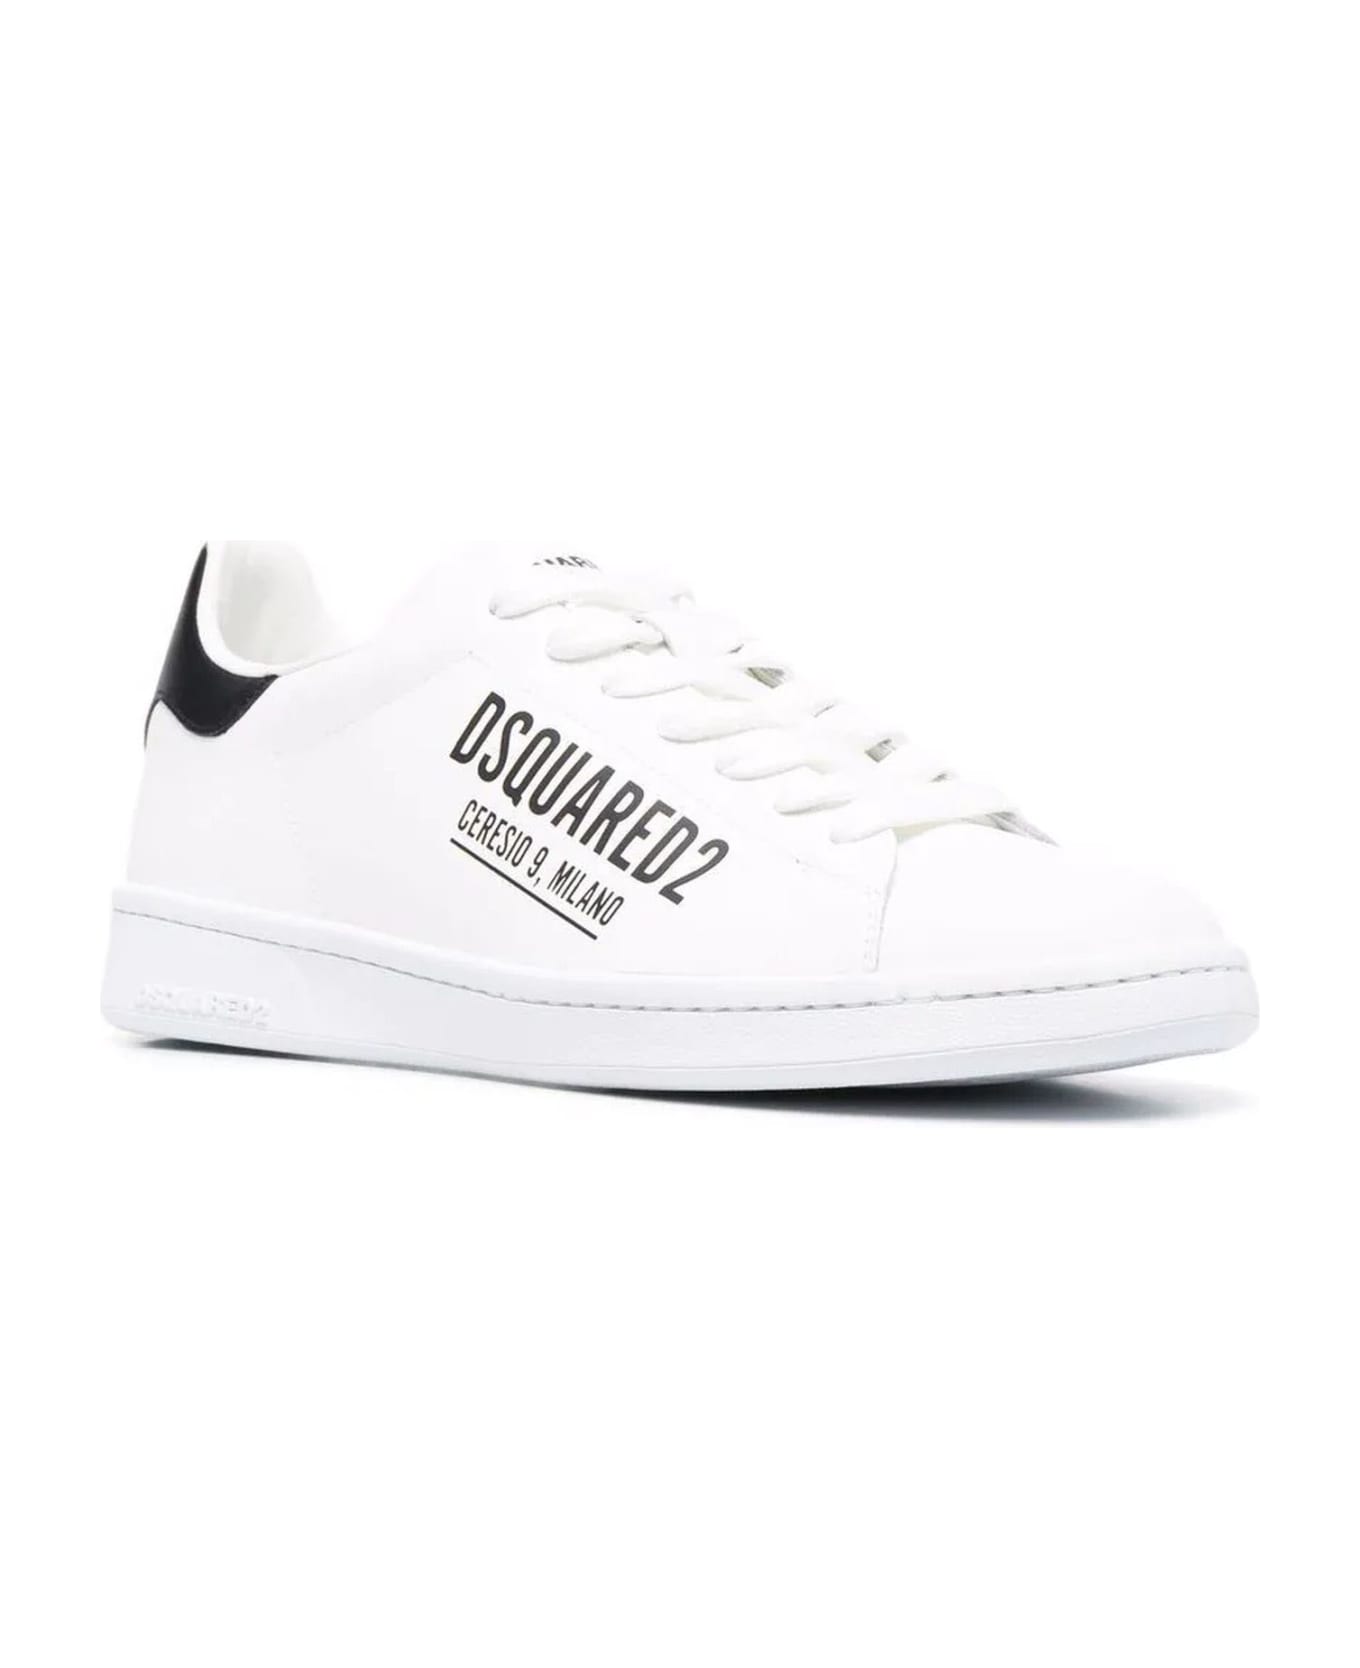 Dsquared2 White Calf Leather Sneakers - White